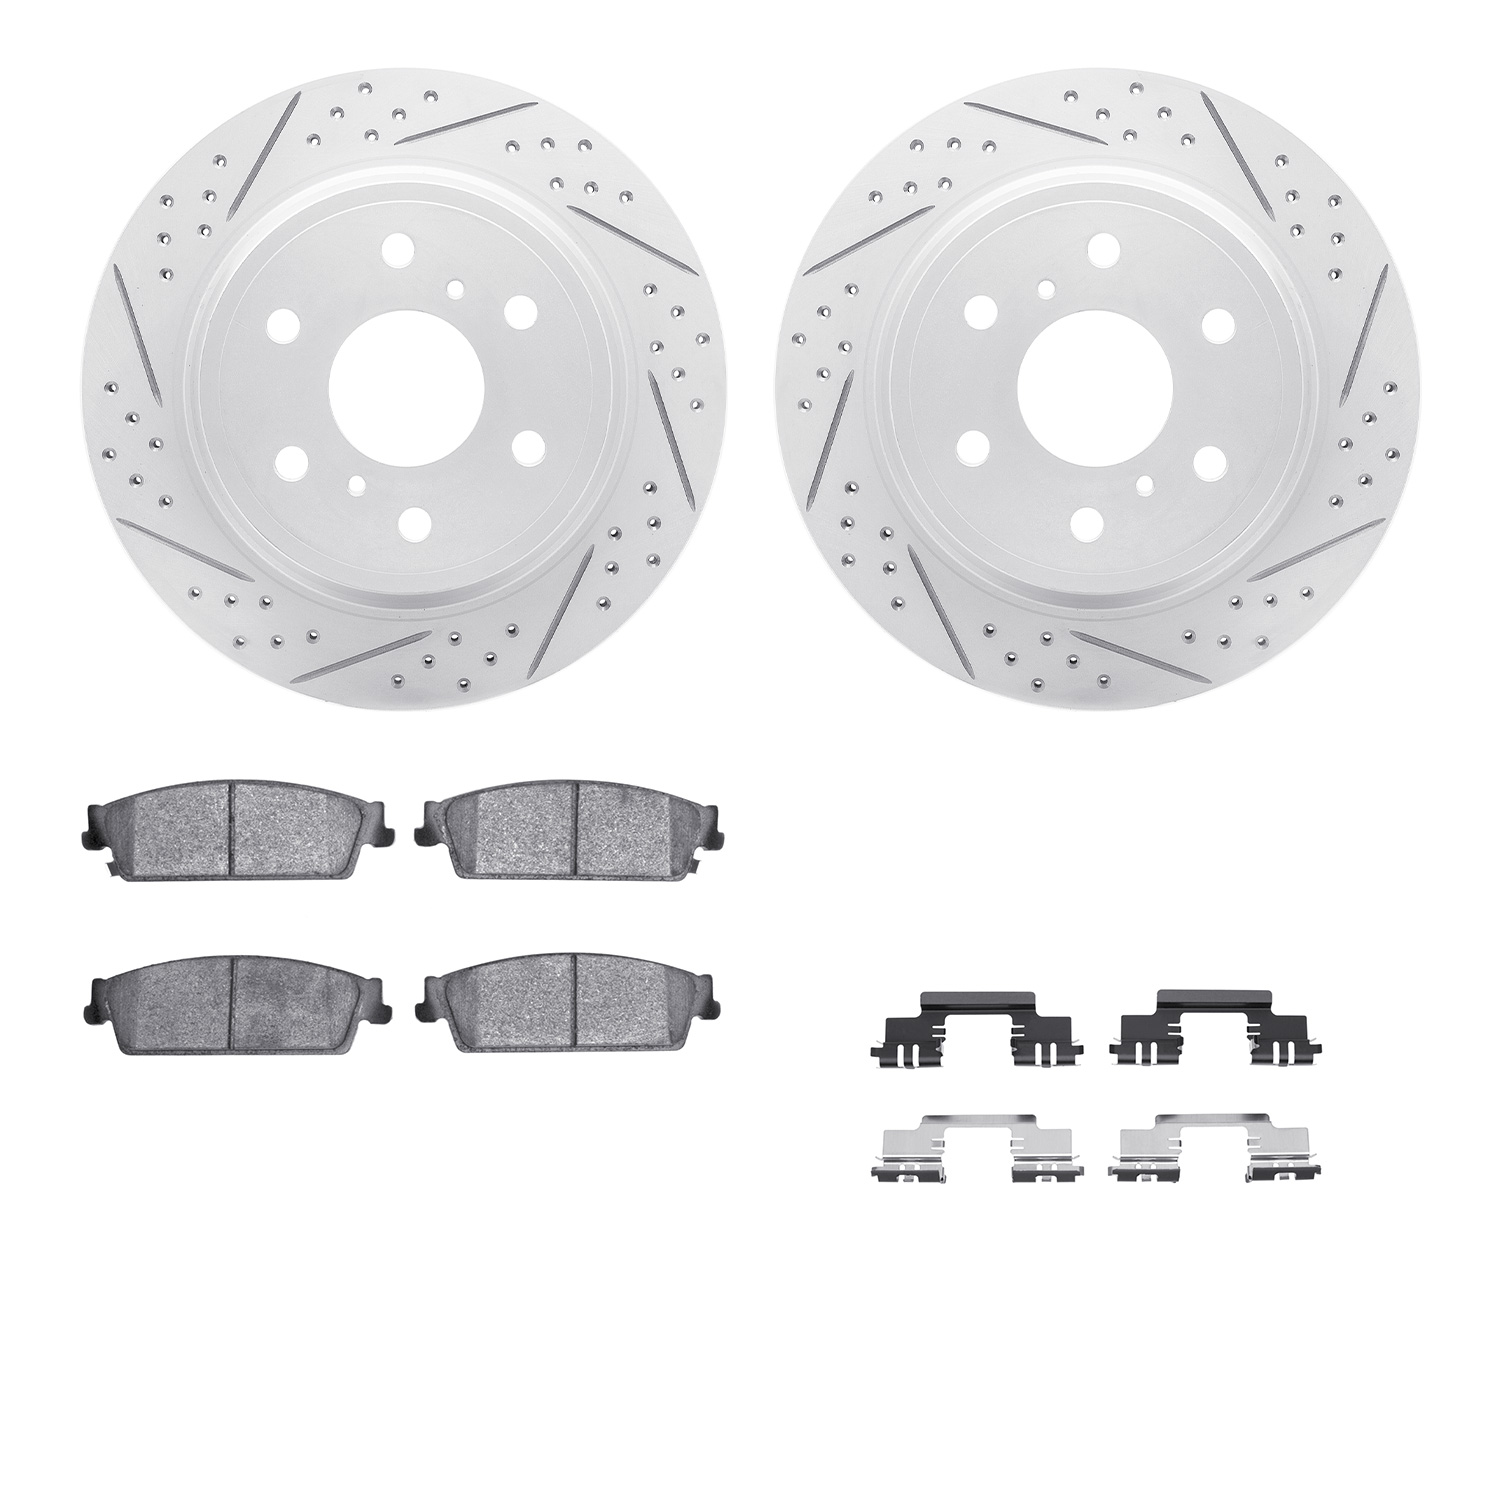 2512-48062 Geoperformance Drilled/Slotted Rotors w/5000 Advanced Brake Pads Kit & Hardware, 2007-2014 GM, Position: Rear